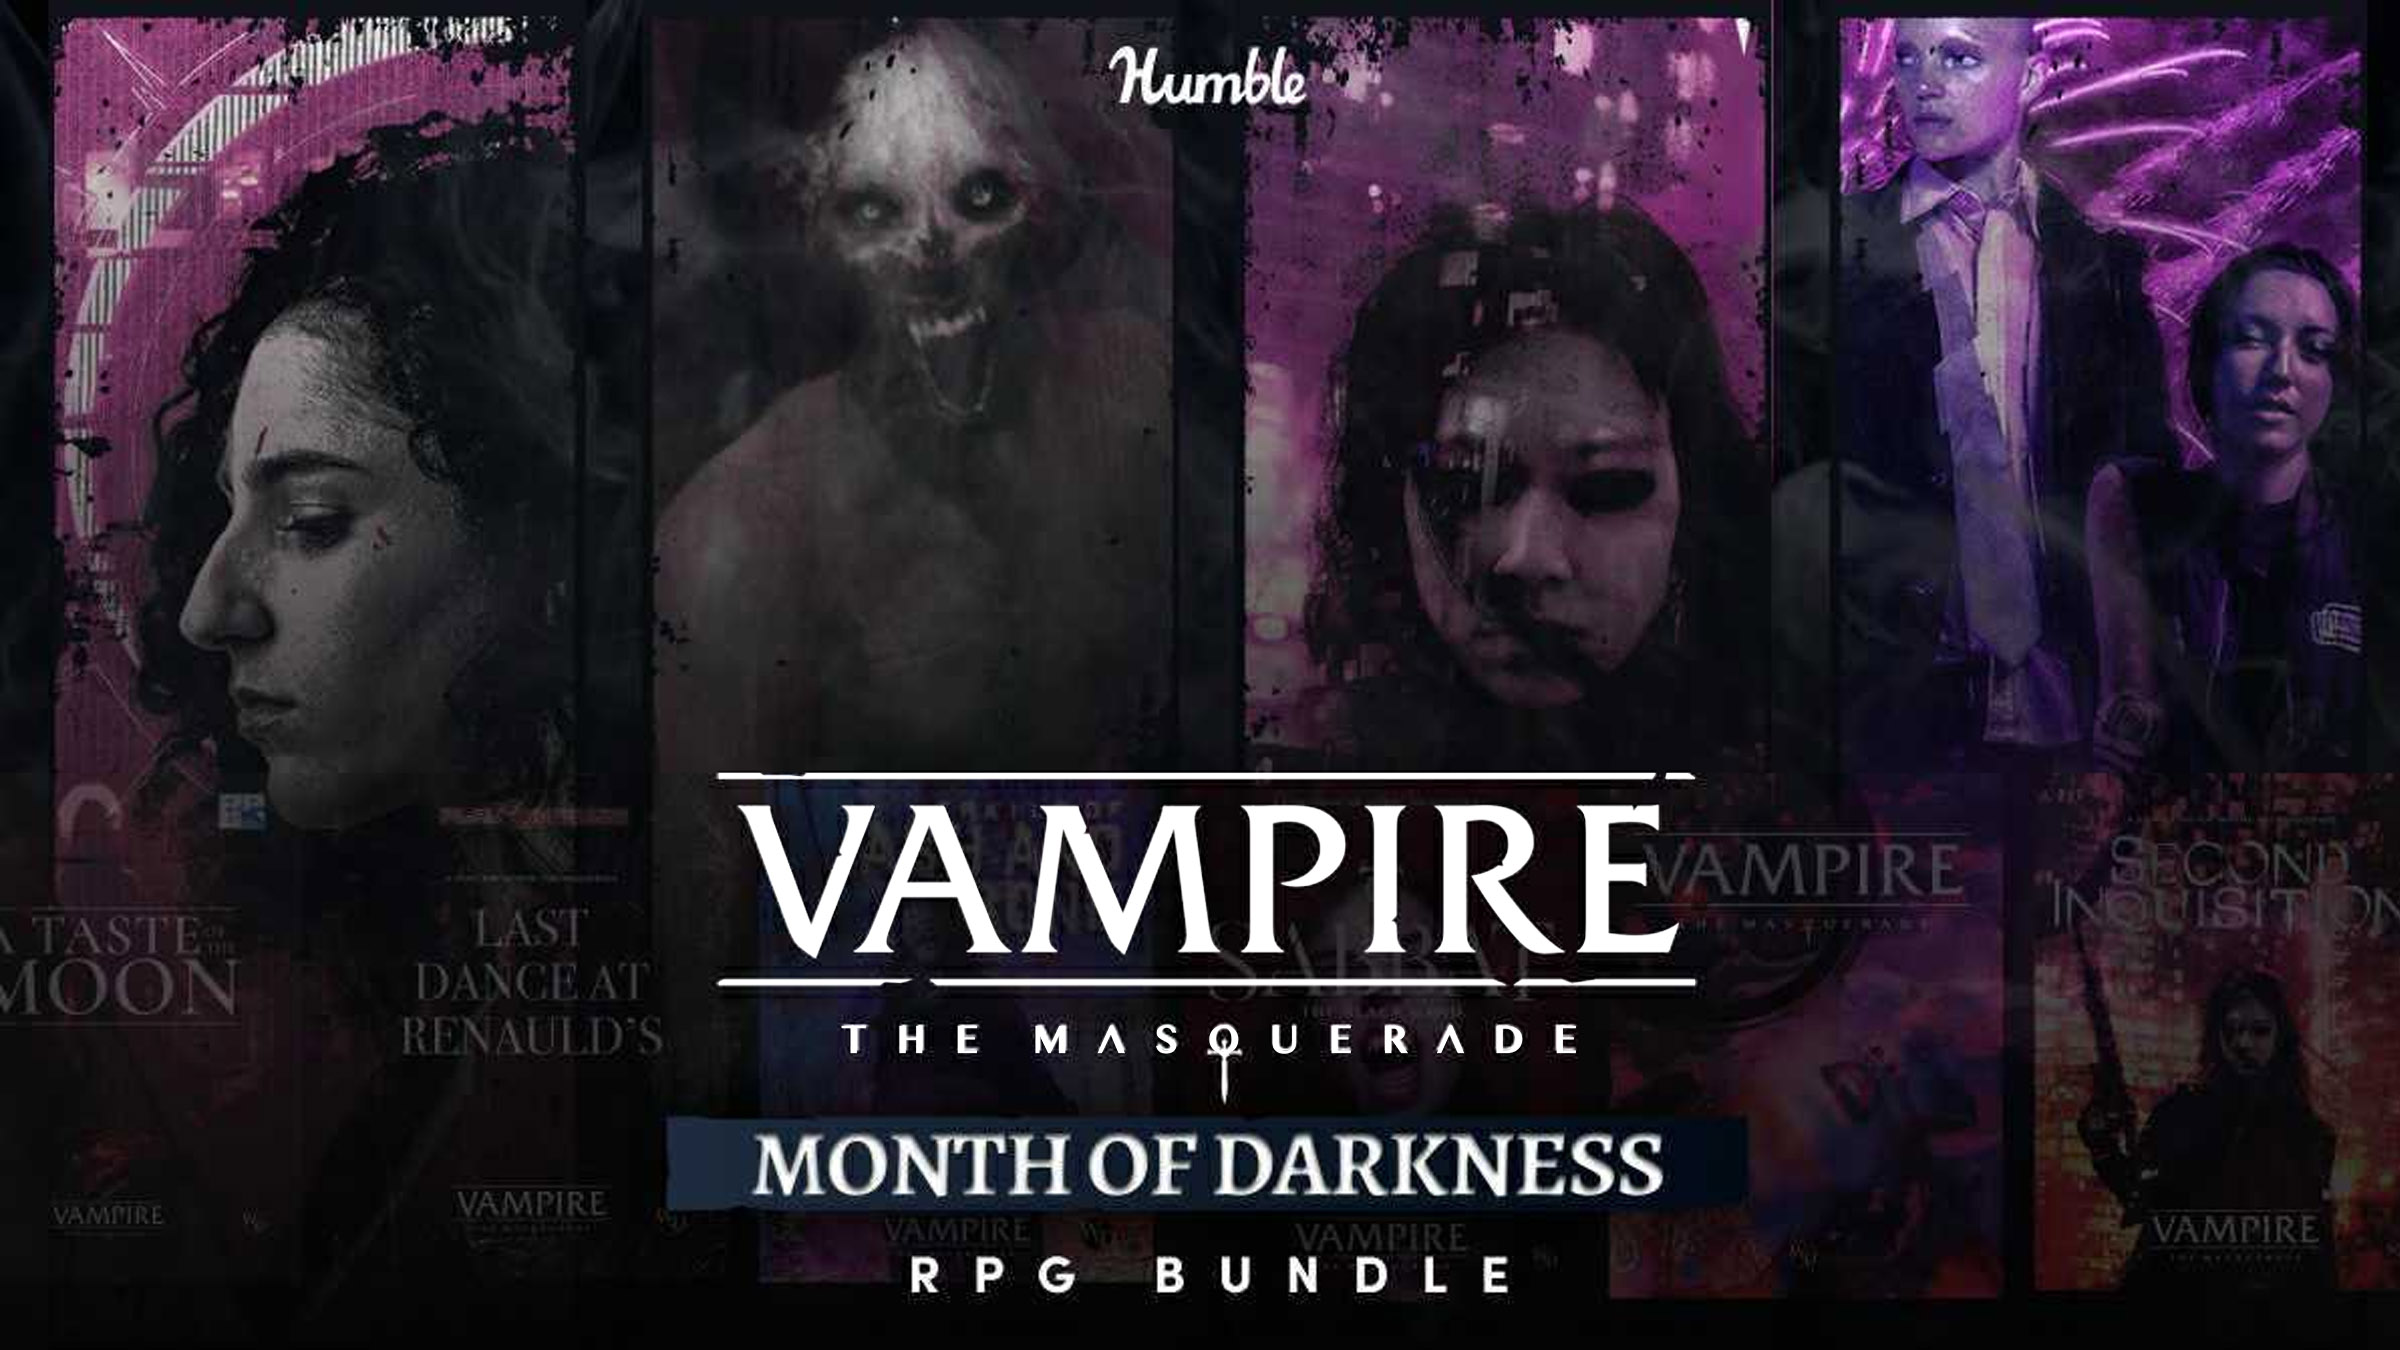 World of Darkness on X: Month of Darkness has begun! As tradition demands,  this marks the beginning of #vamptober - but this year, we're expanding it  with a second set of prompts - #